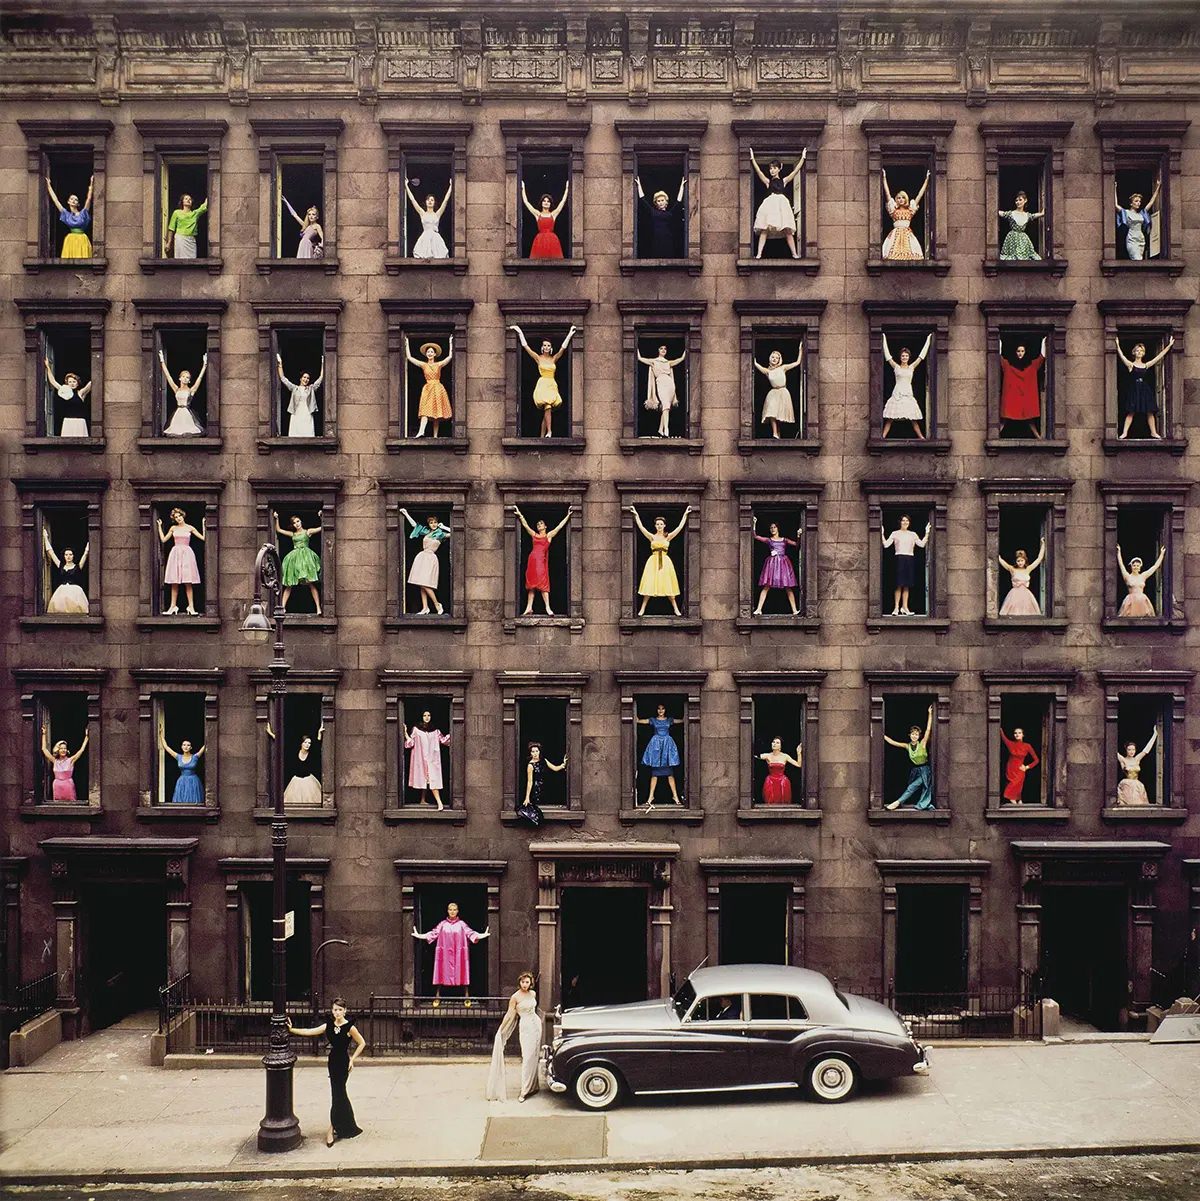 Ormond Gigli's Timeless Masterpiece: The Iconic "Girls in the Windows" Poster